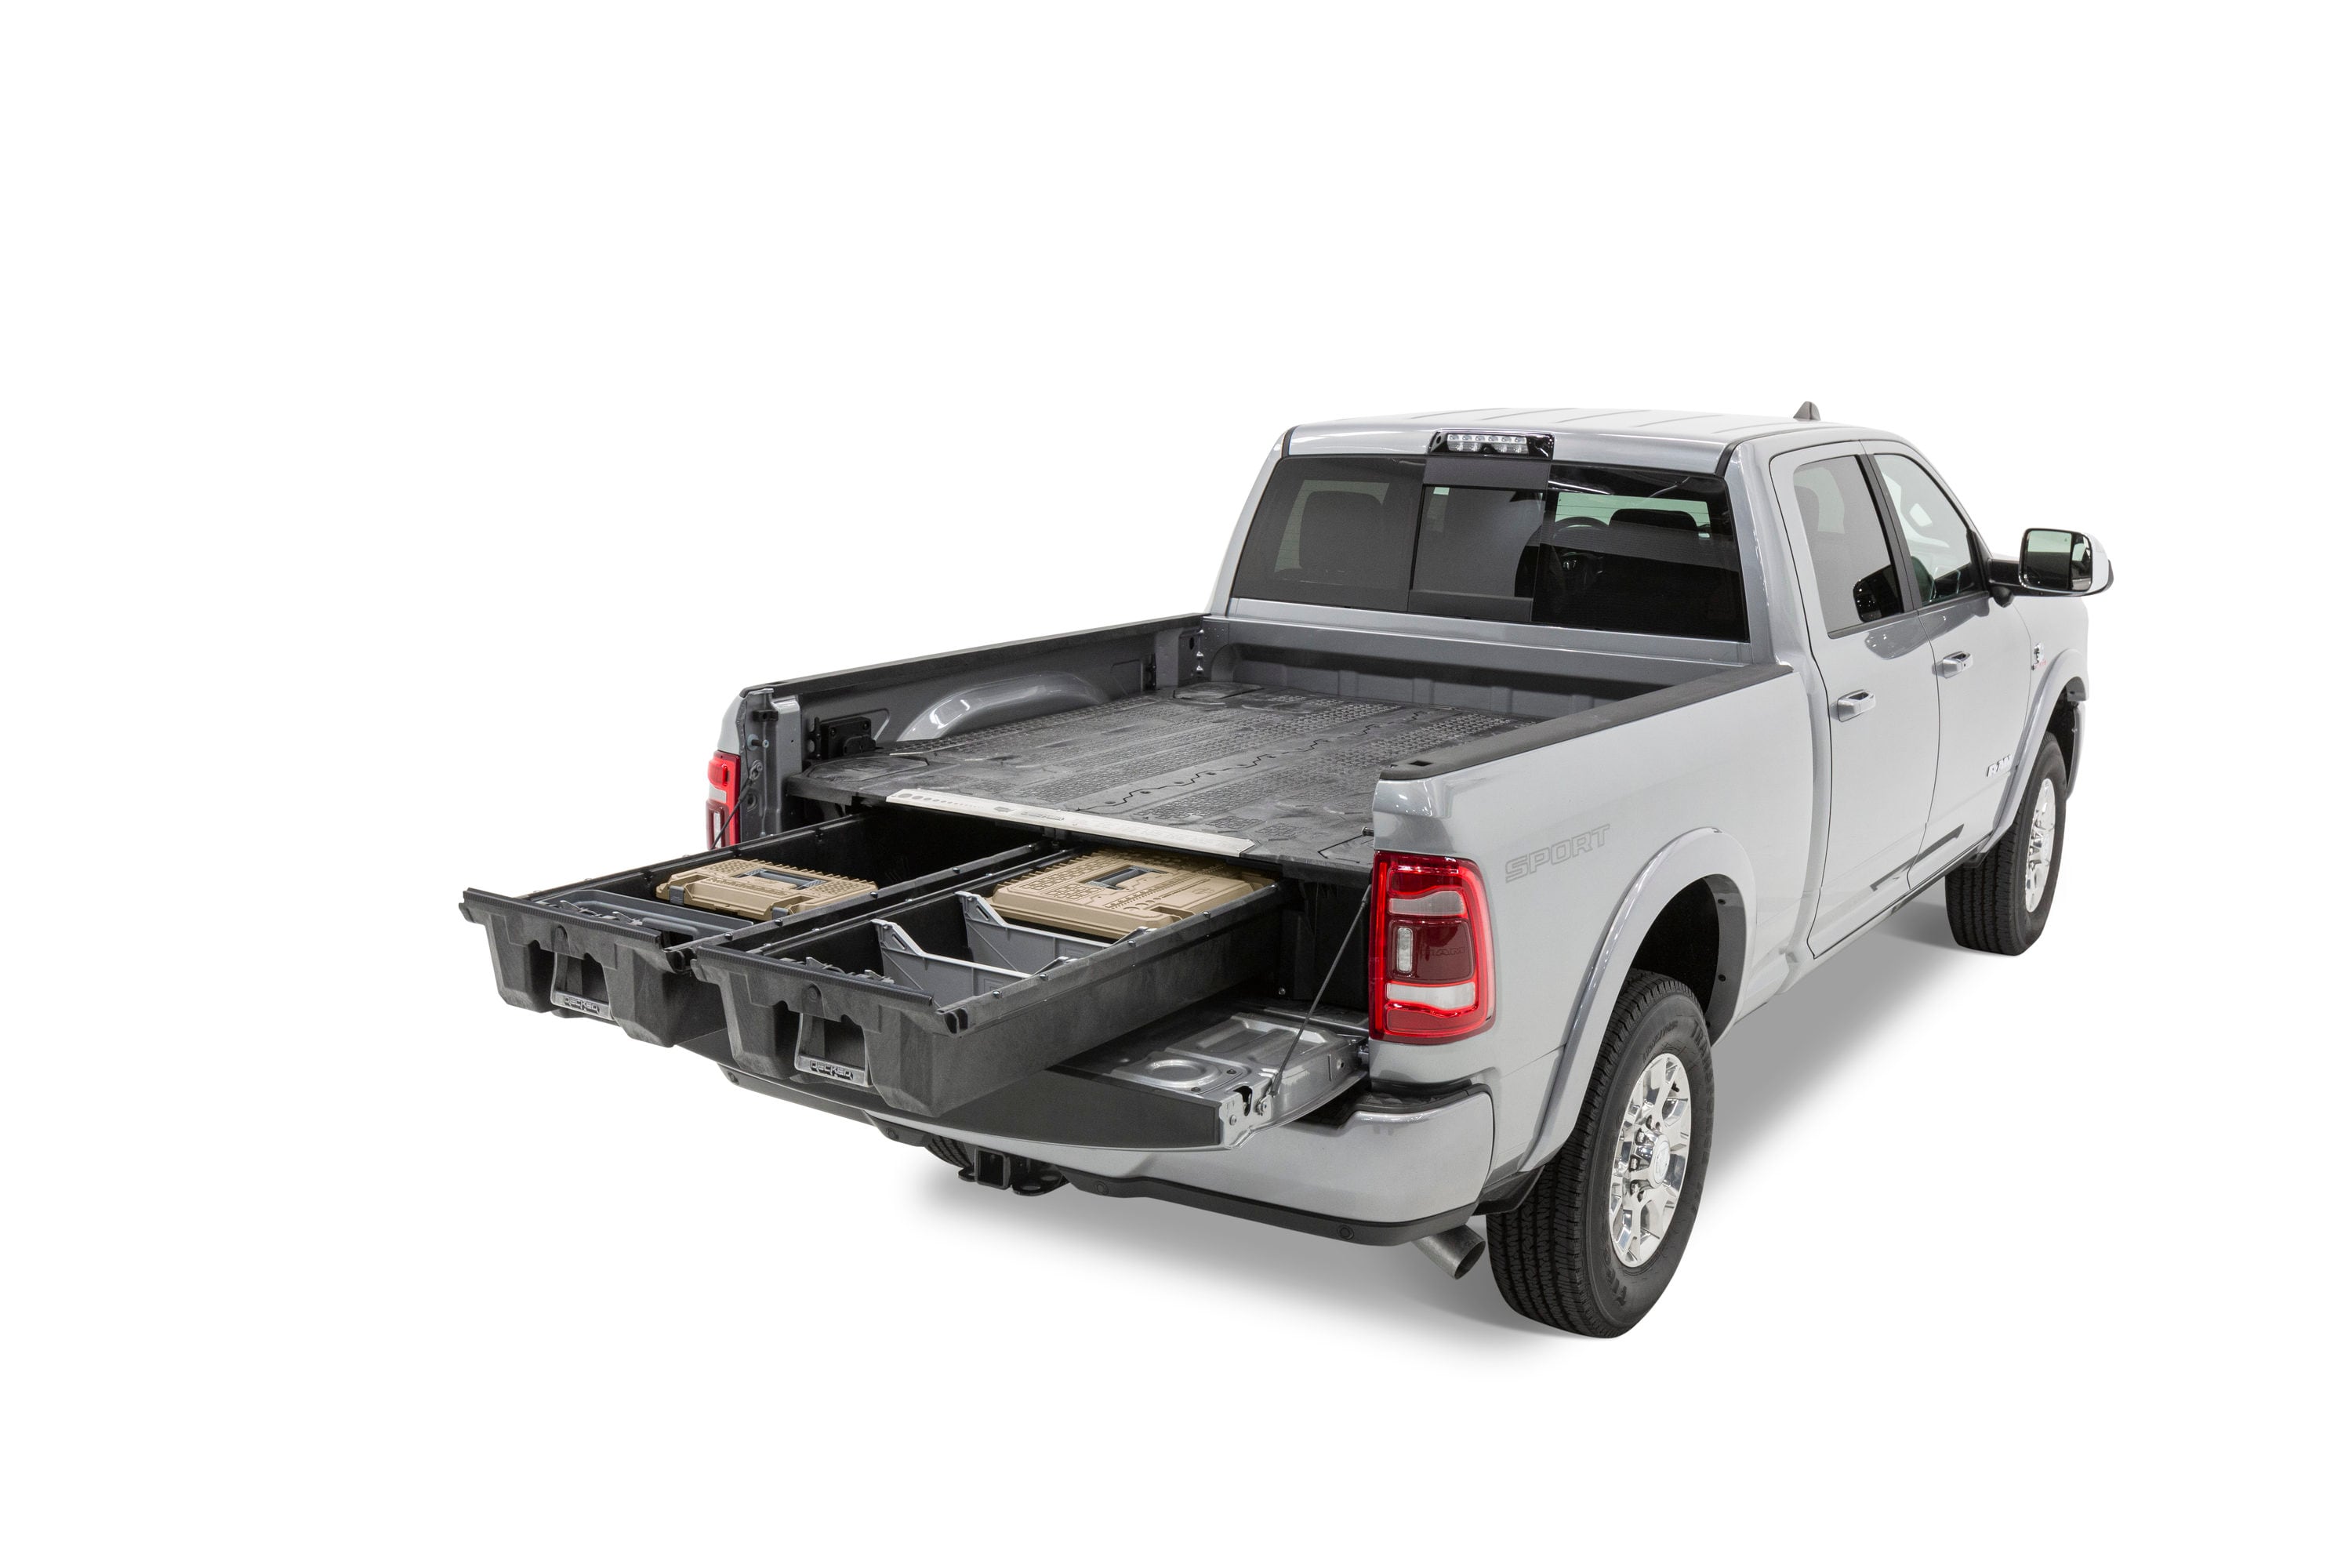 DECKED DECKED Storage System for RAM 1500 (2009-2018) 1500 Classic (2019)- 5-ft 7-in Bed Length in Black | DR3